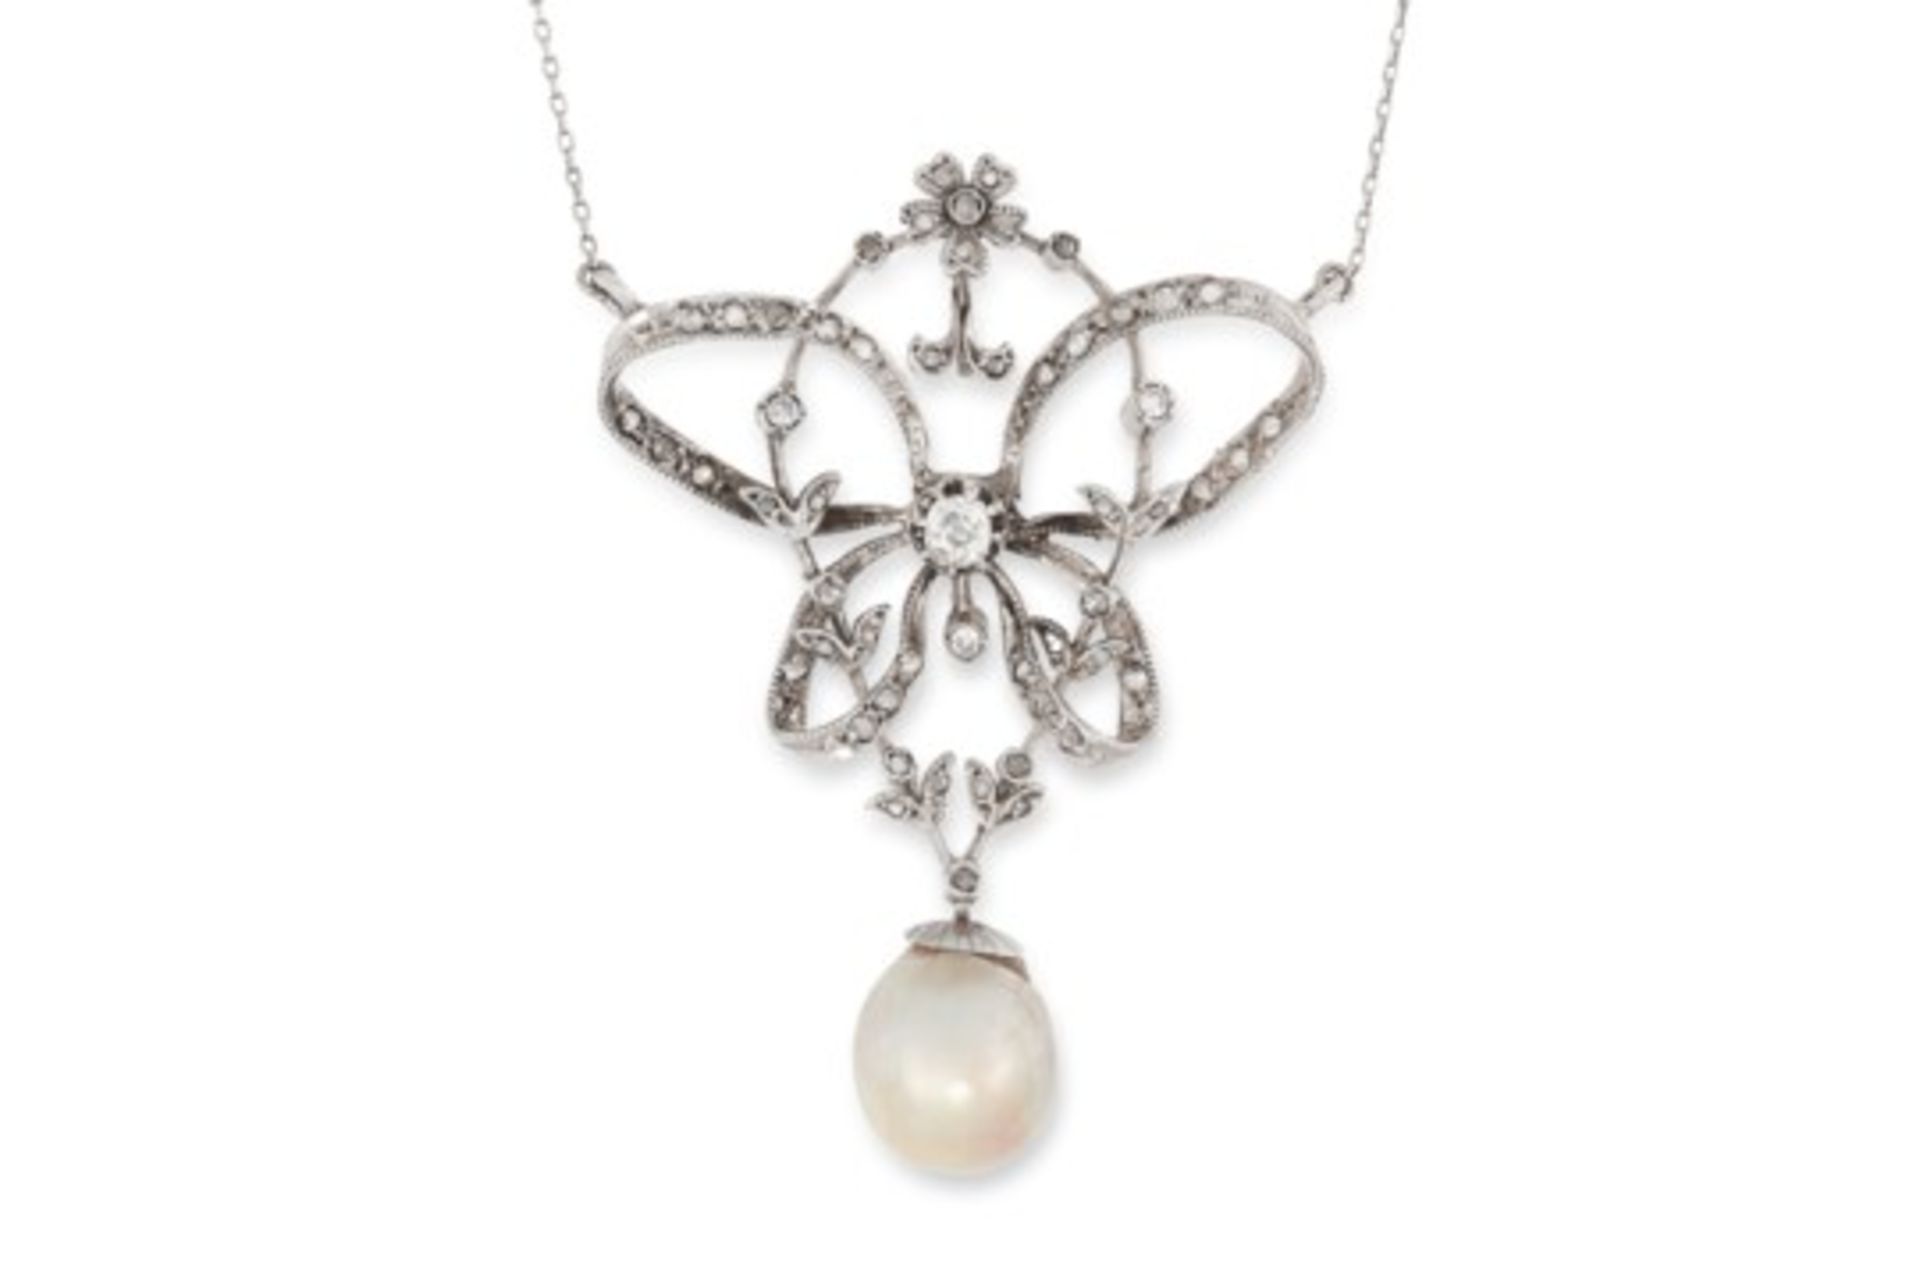 AN ANTIQUE NATURAL PEARL AND DIAMOND PENDANT NECKLACE in an open framework design, set with old